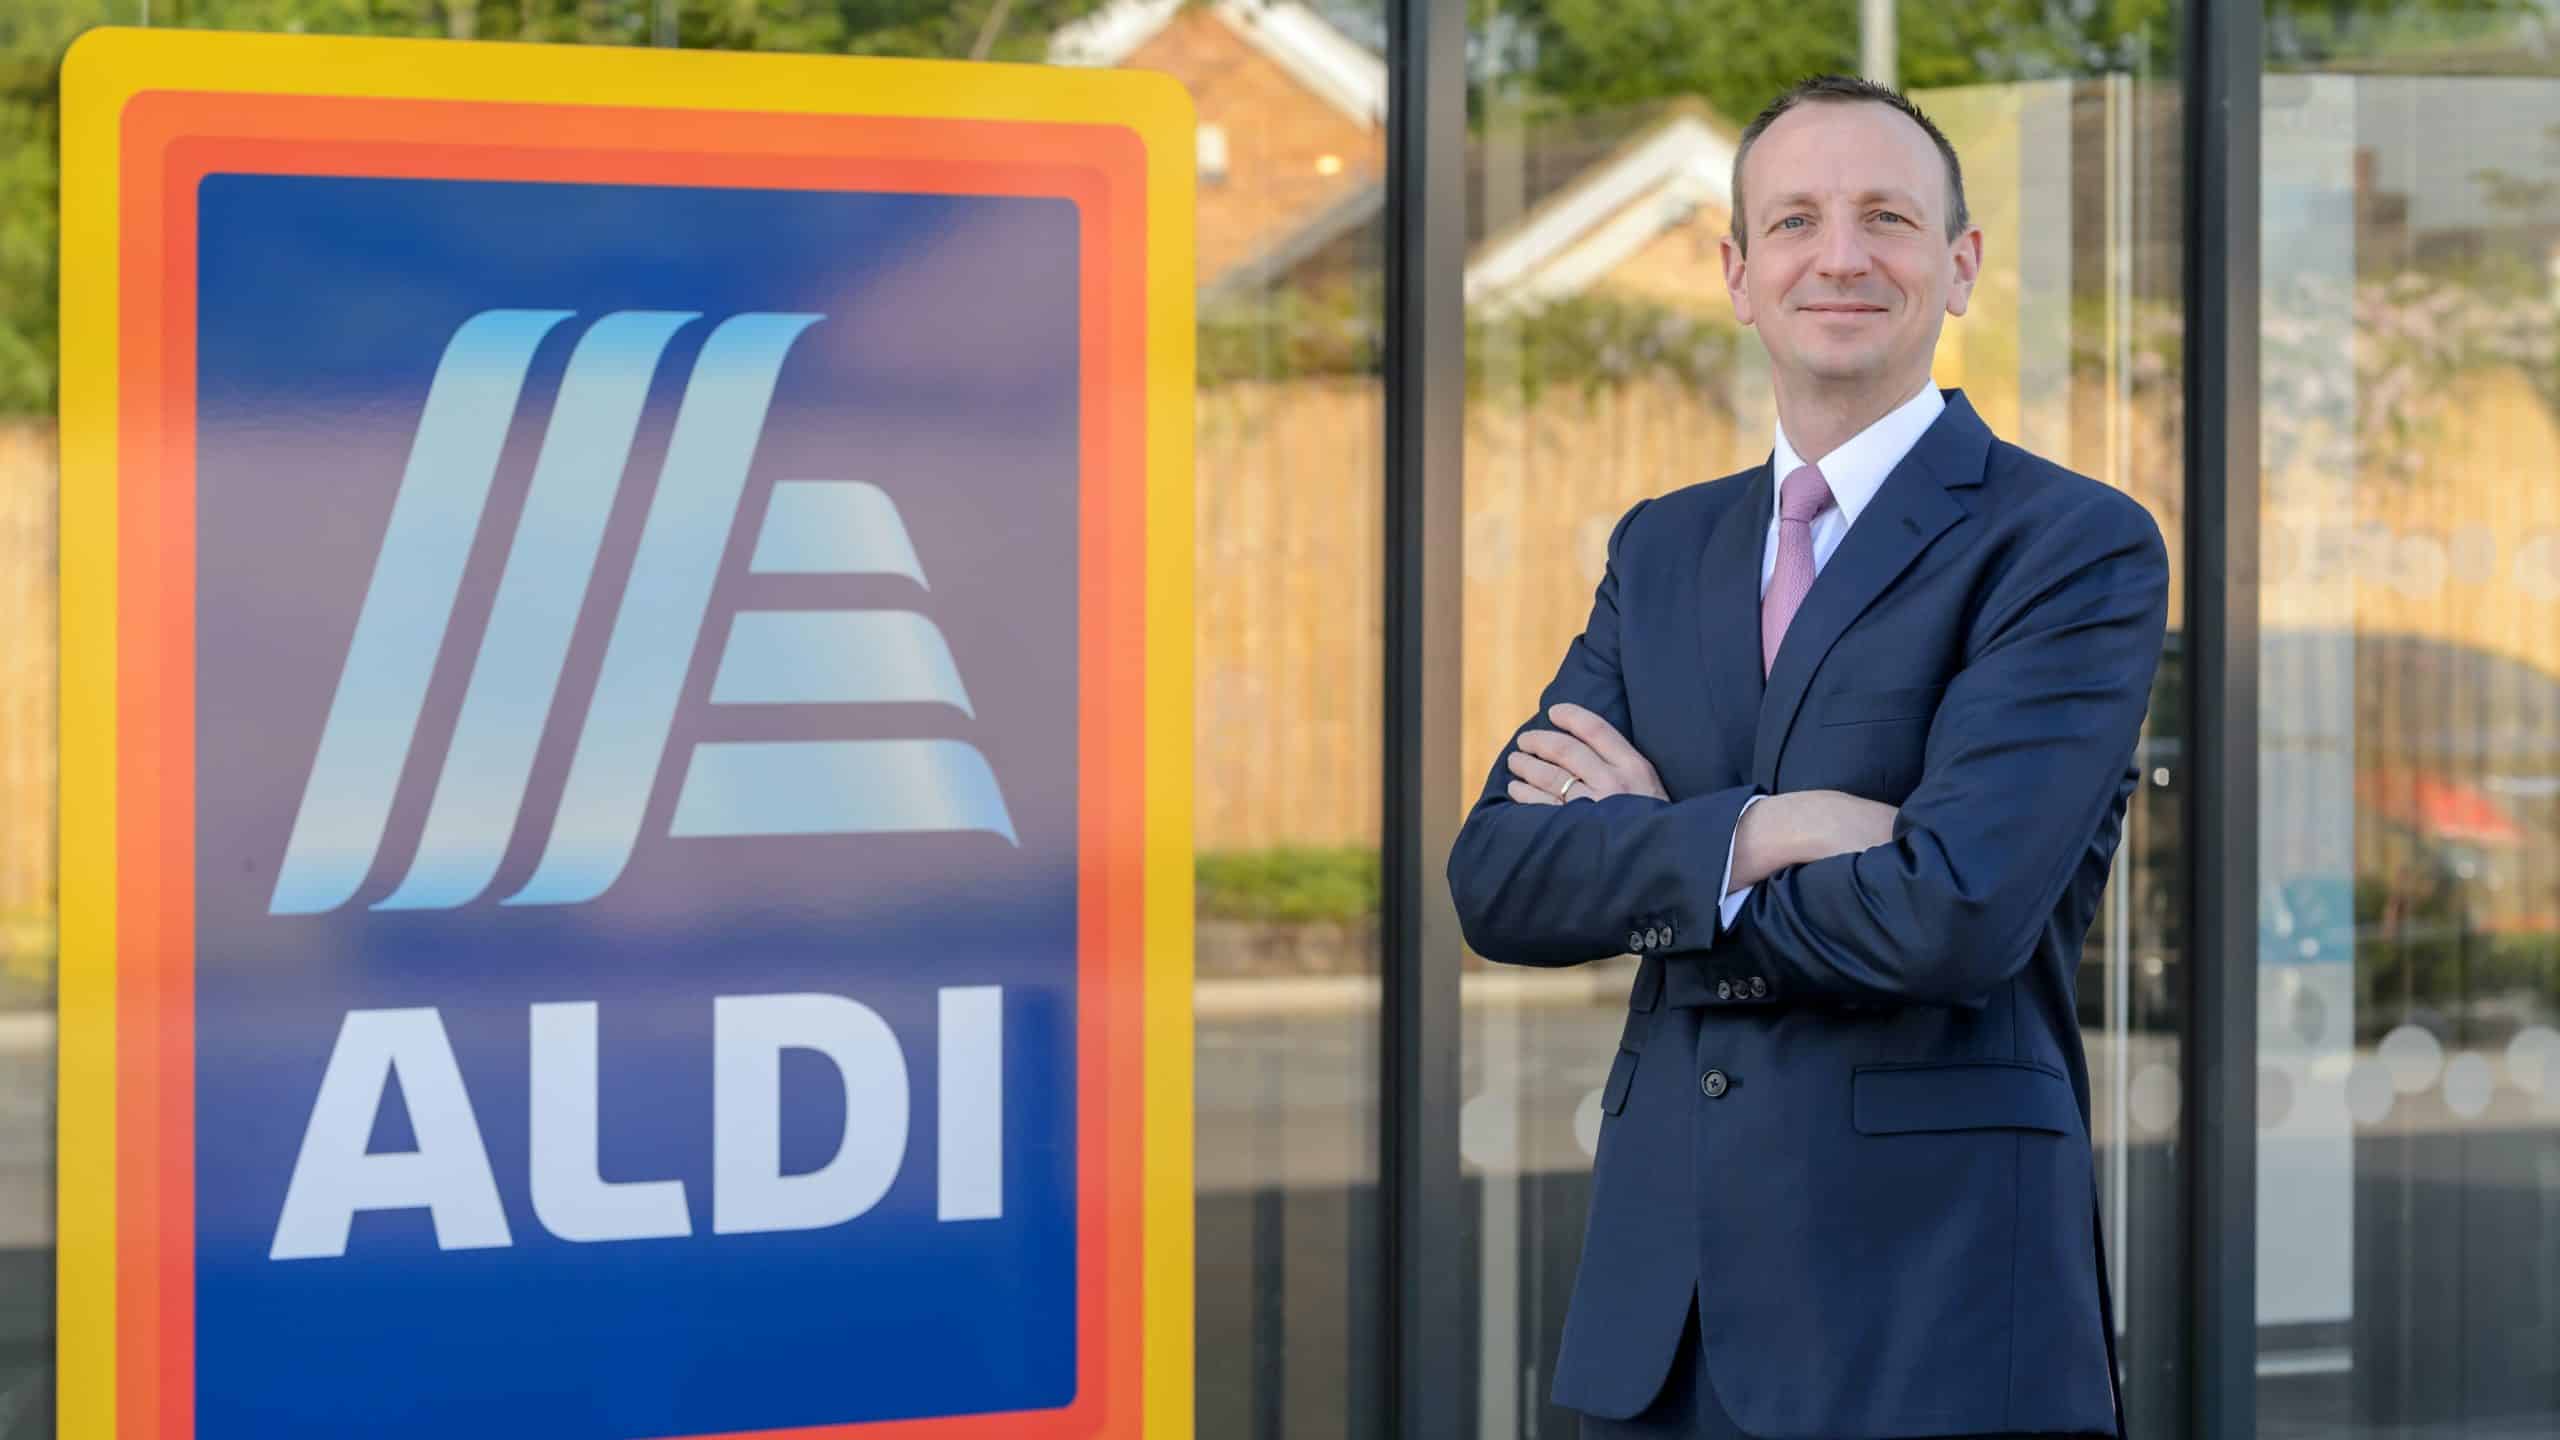 Aldi becomes latest supermarket to ban chlorinated chicken from its shelves